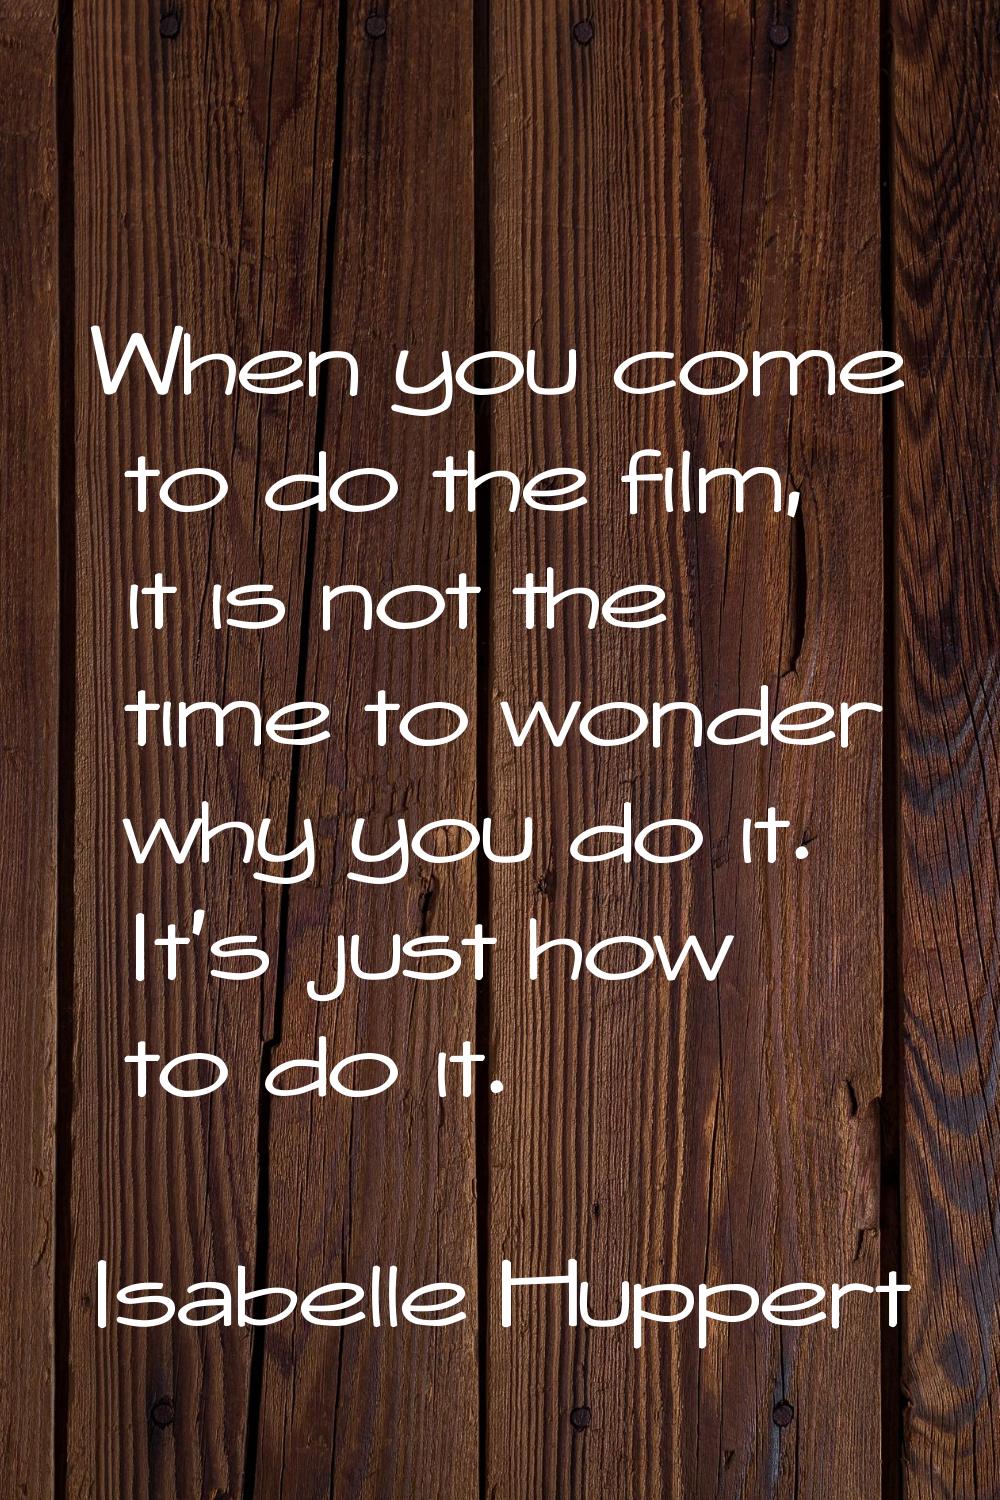 When you come to do the film, it is not the time to wonder why you do it. It's just how to do it.